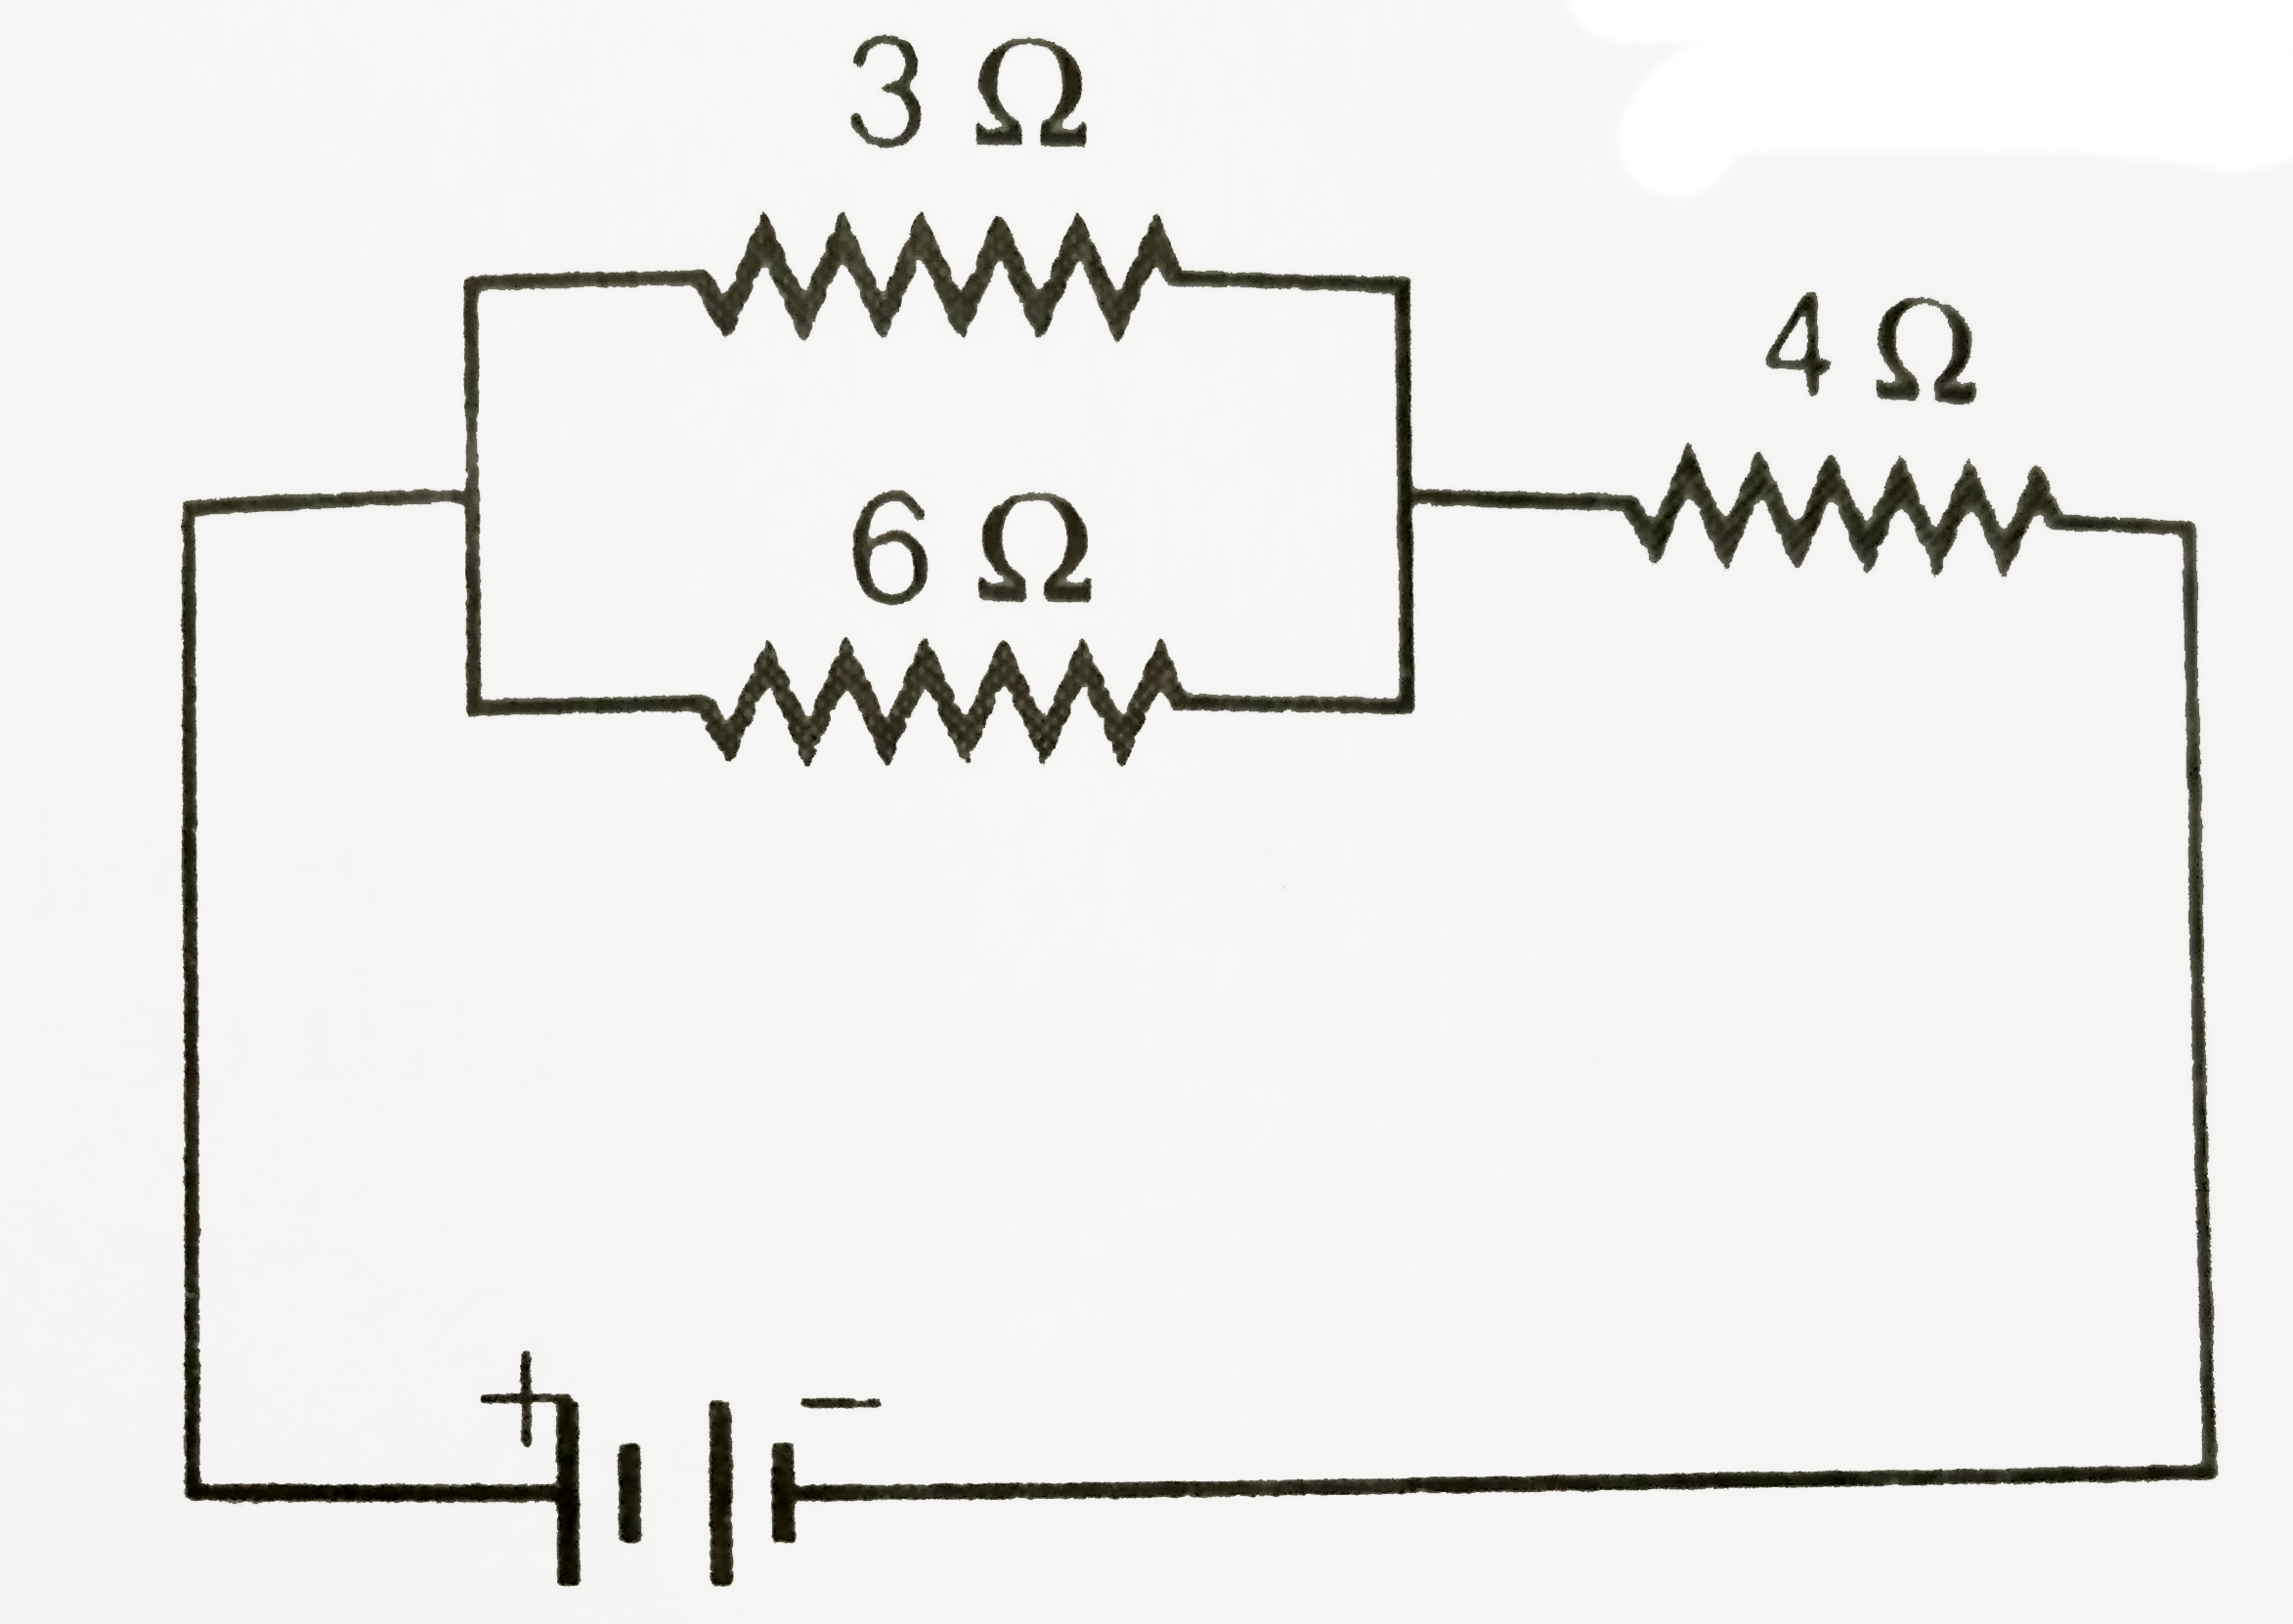 Current through 3Omega resistor is 0.8A, then potential drop through 4Omega resistor is